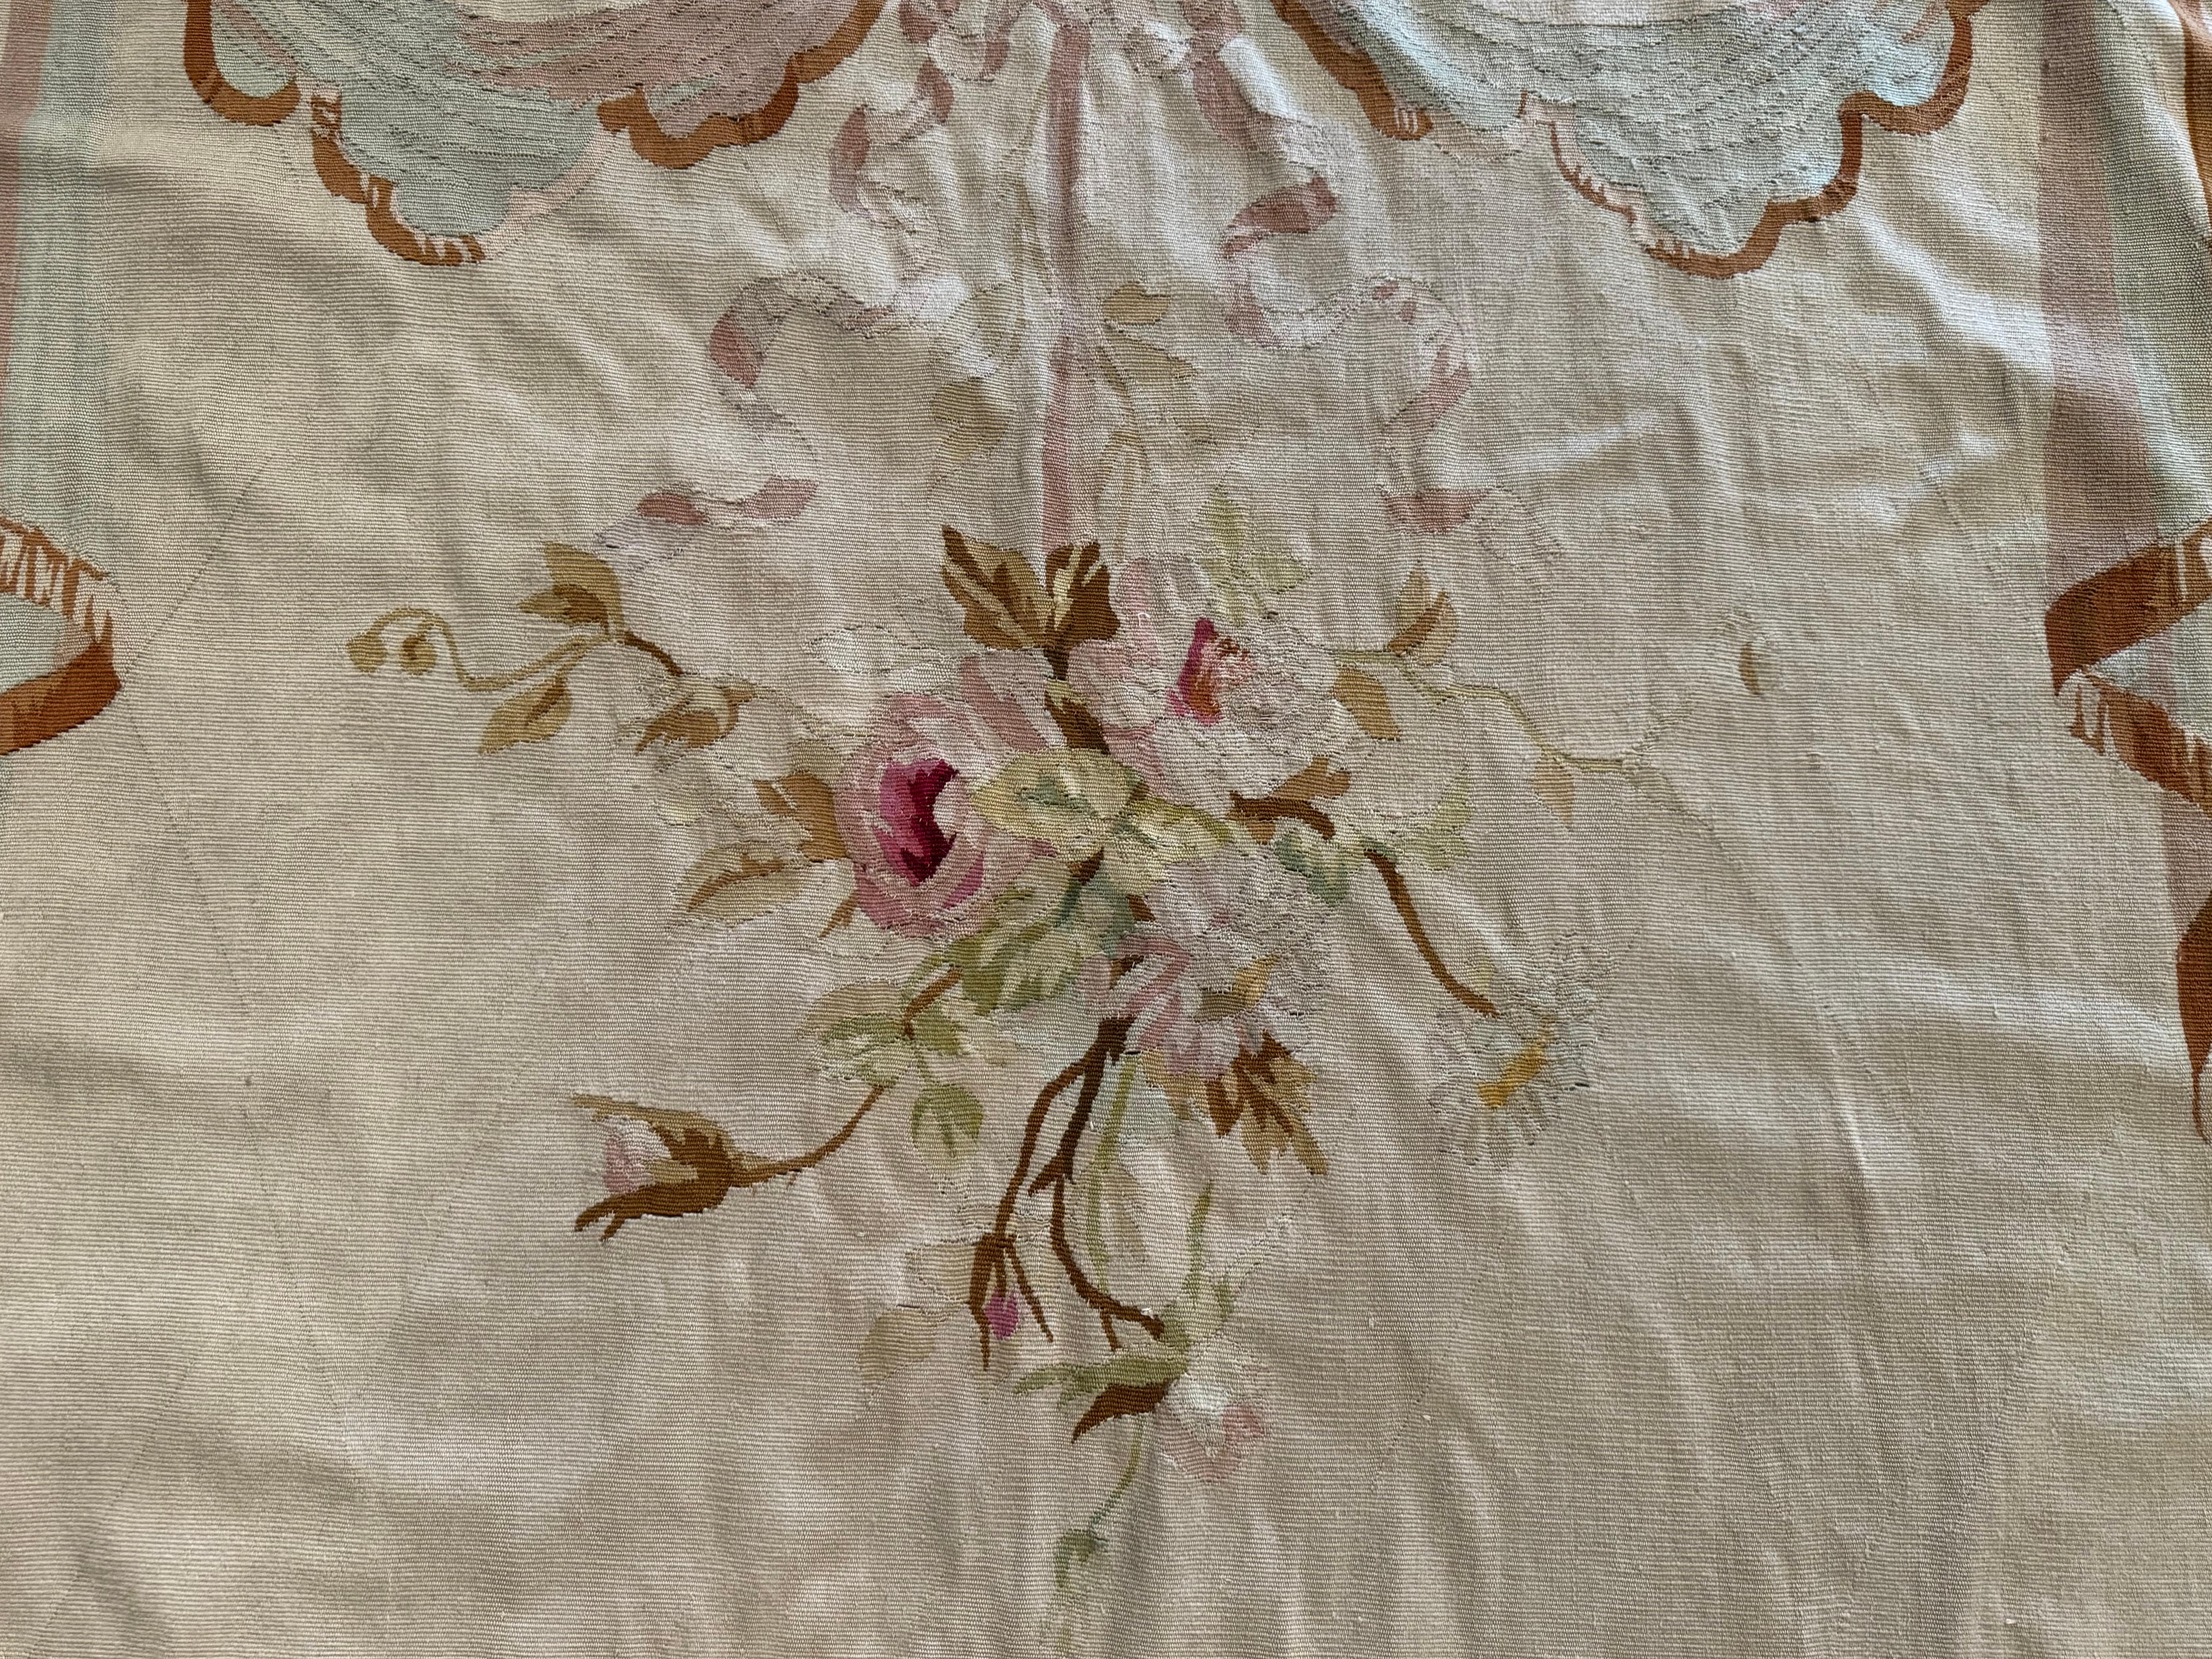 Pair of Mid-19th Century French Handwoven Floral Aubusson Wall Hanging Portieres For Sale 2